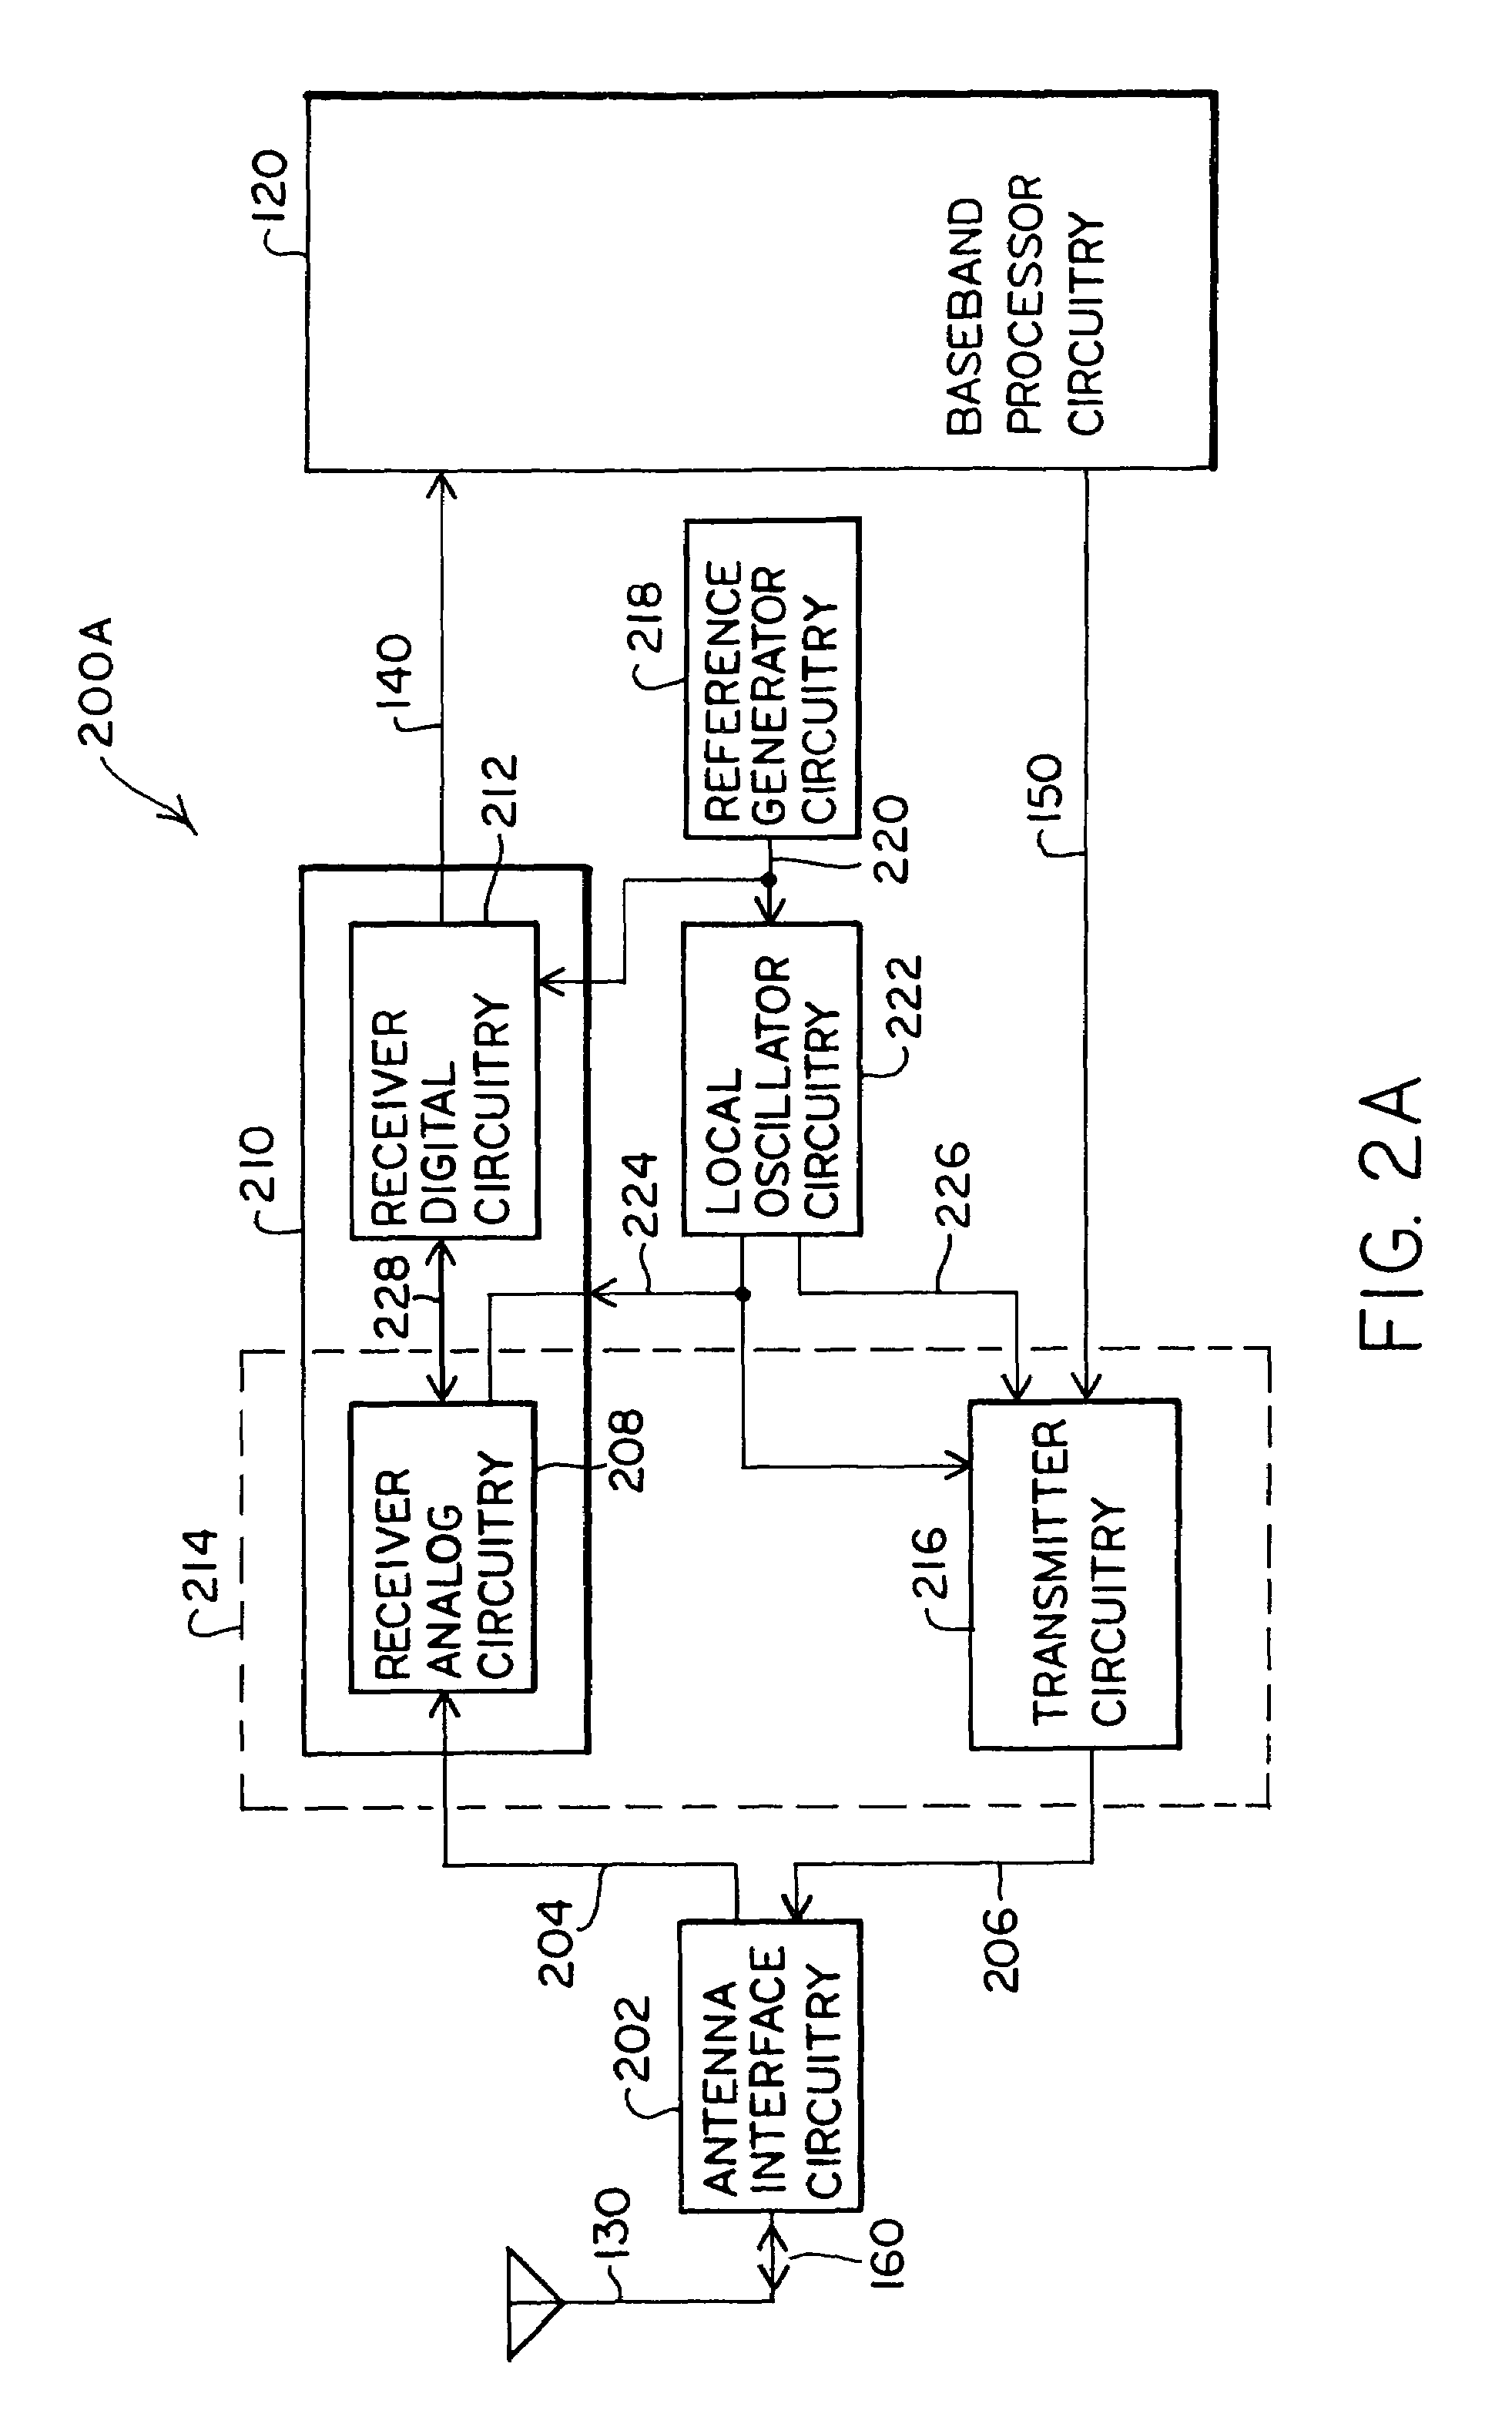 Apparatus for generating multiple radio frequencies in communication circuitry and associated methods